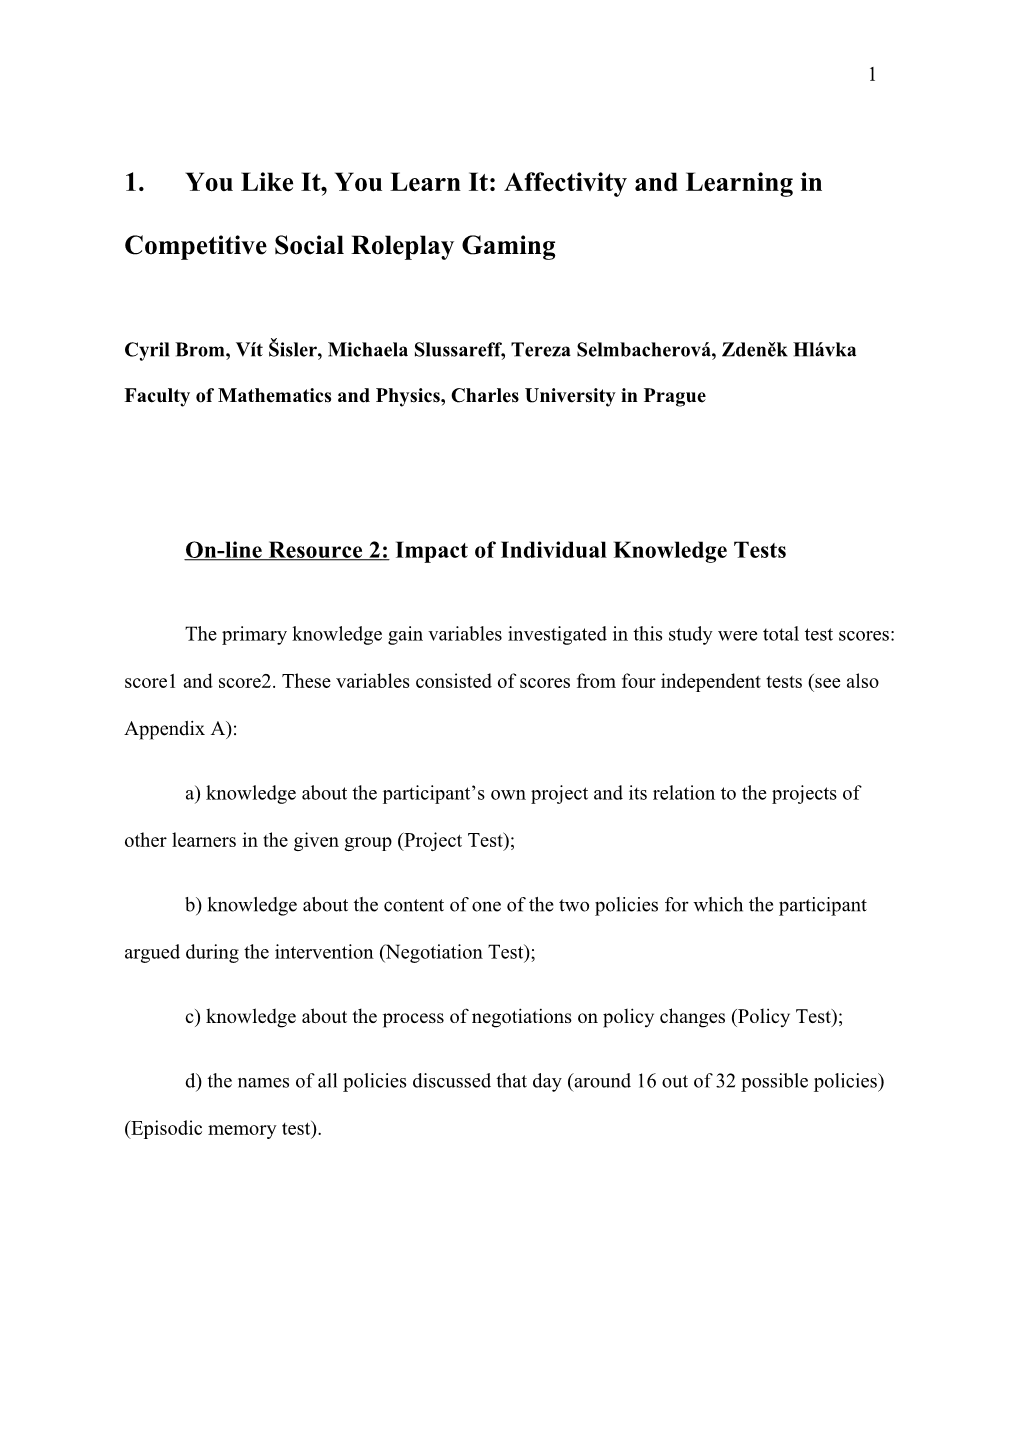 You Like It, You Learn It: Affectivity and Learning in Competitive Social Roleplay Gaming